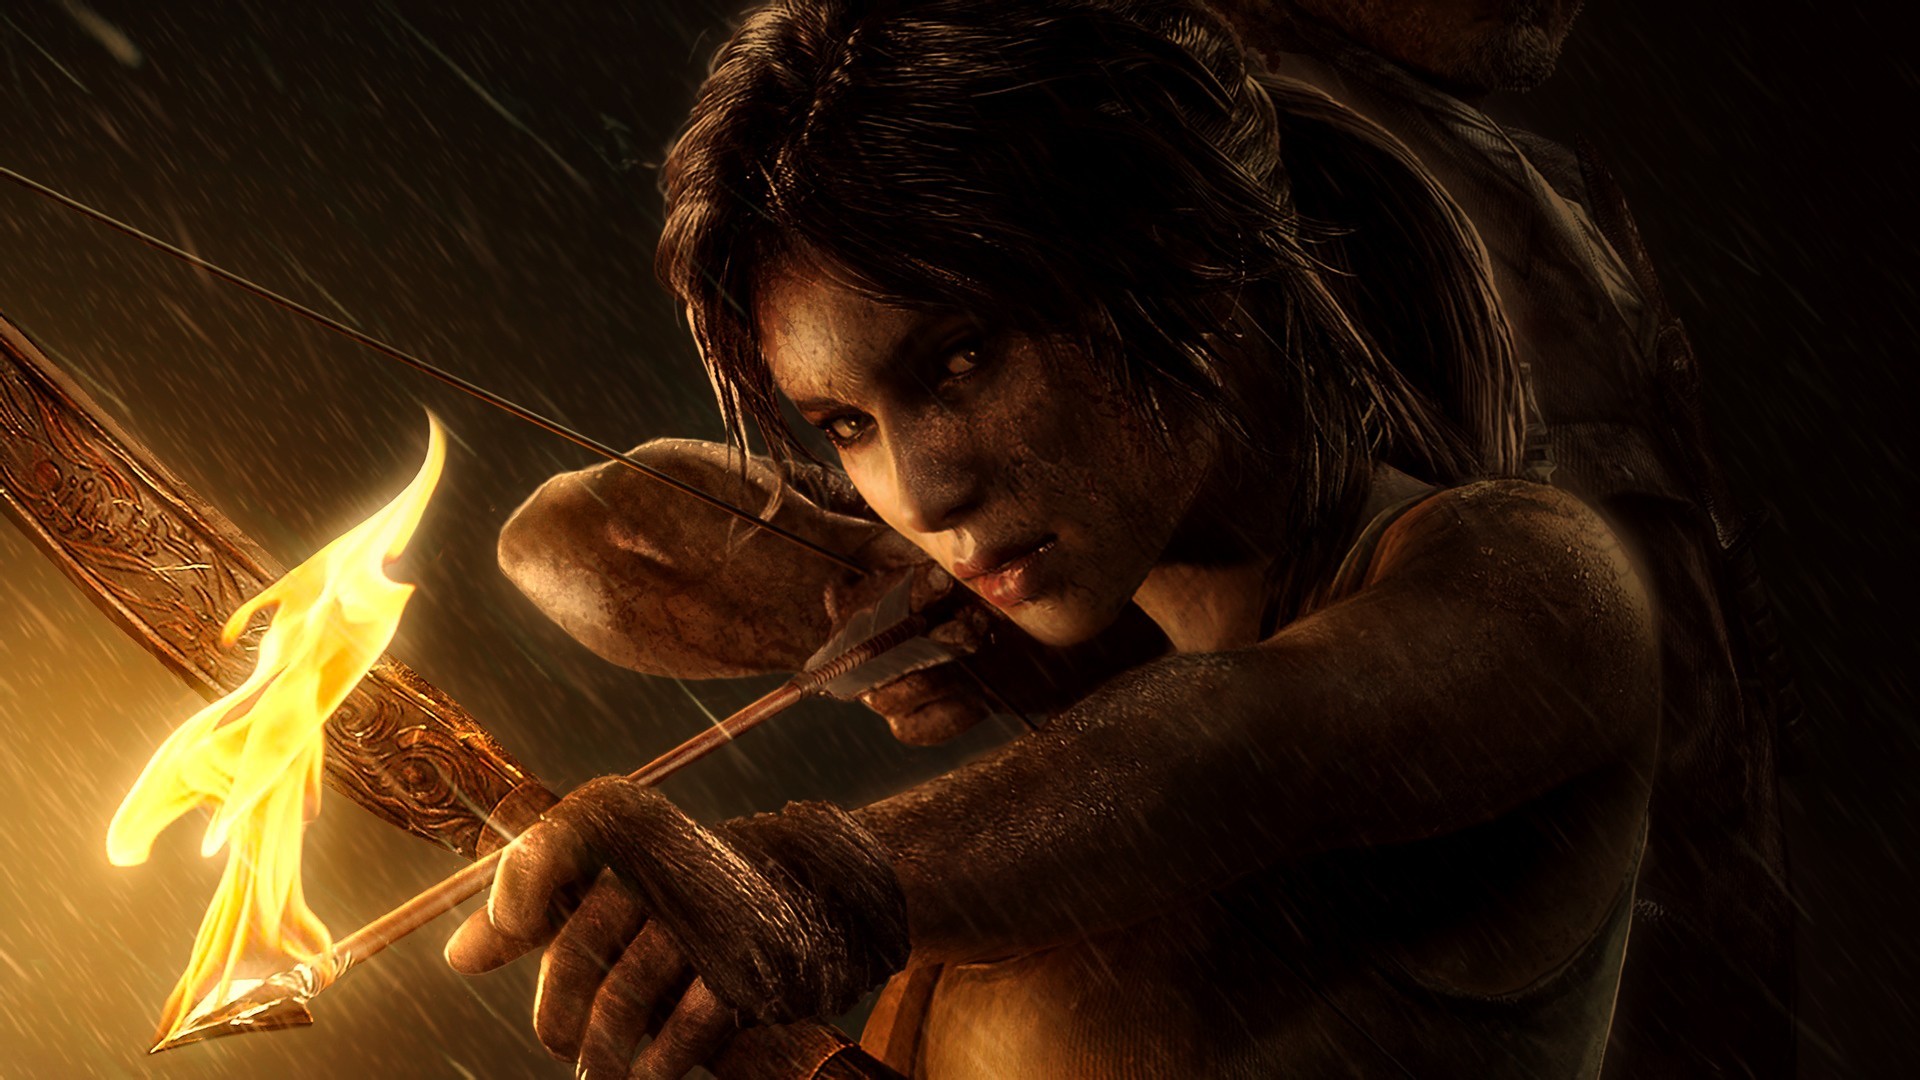 General 1920x1080 Tomb Raider video games Arrow (TV series) bow video game art aiming fire rain video game girls Lara Croft (Tomb Raider) bow and arrow video game characters